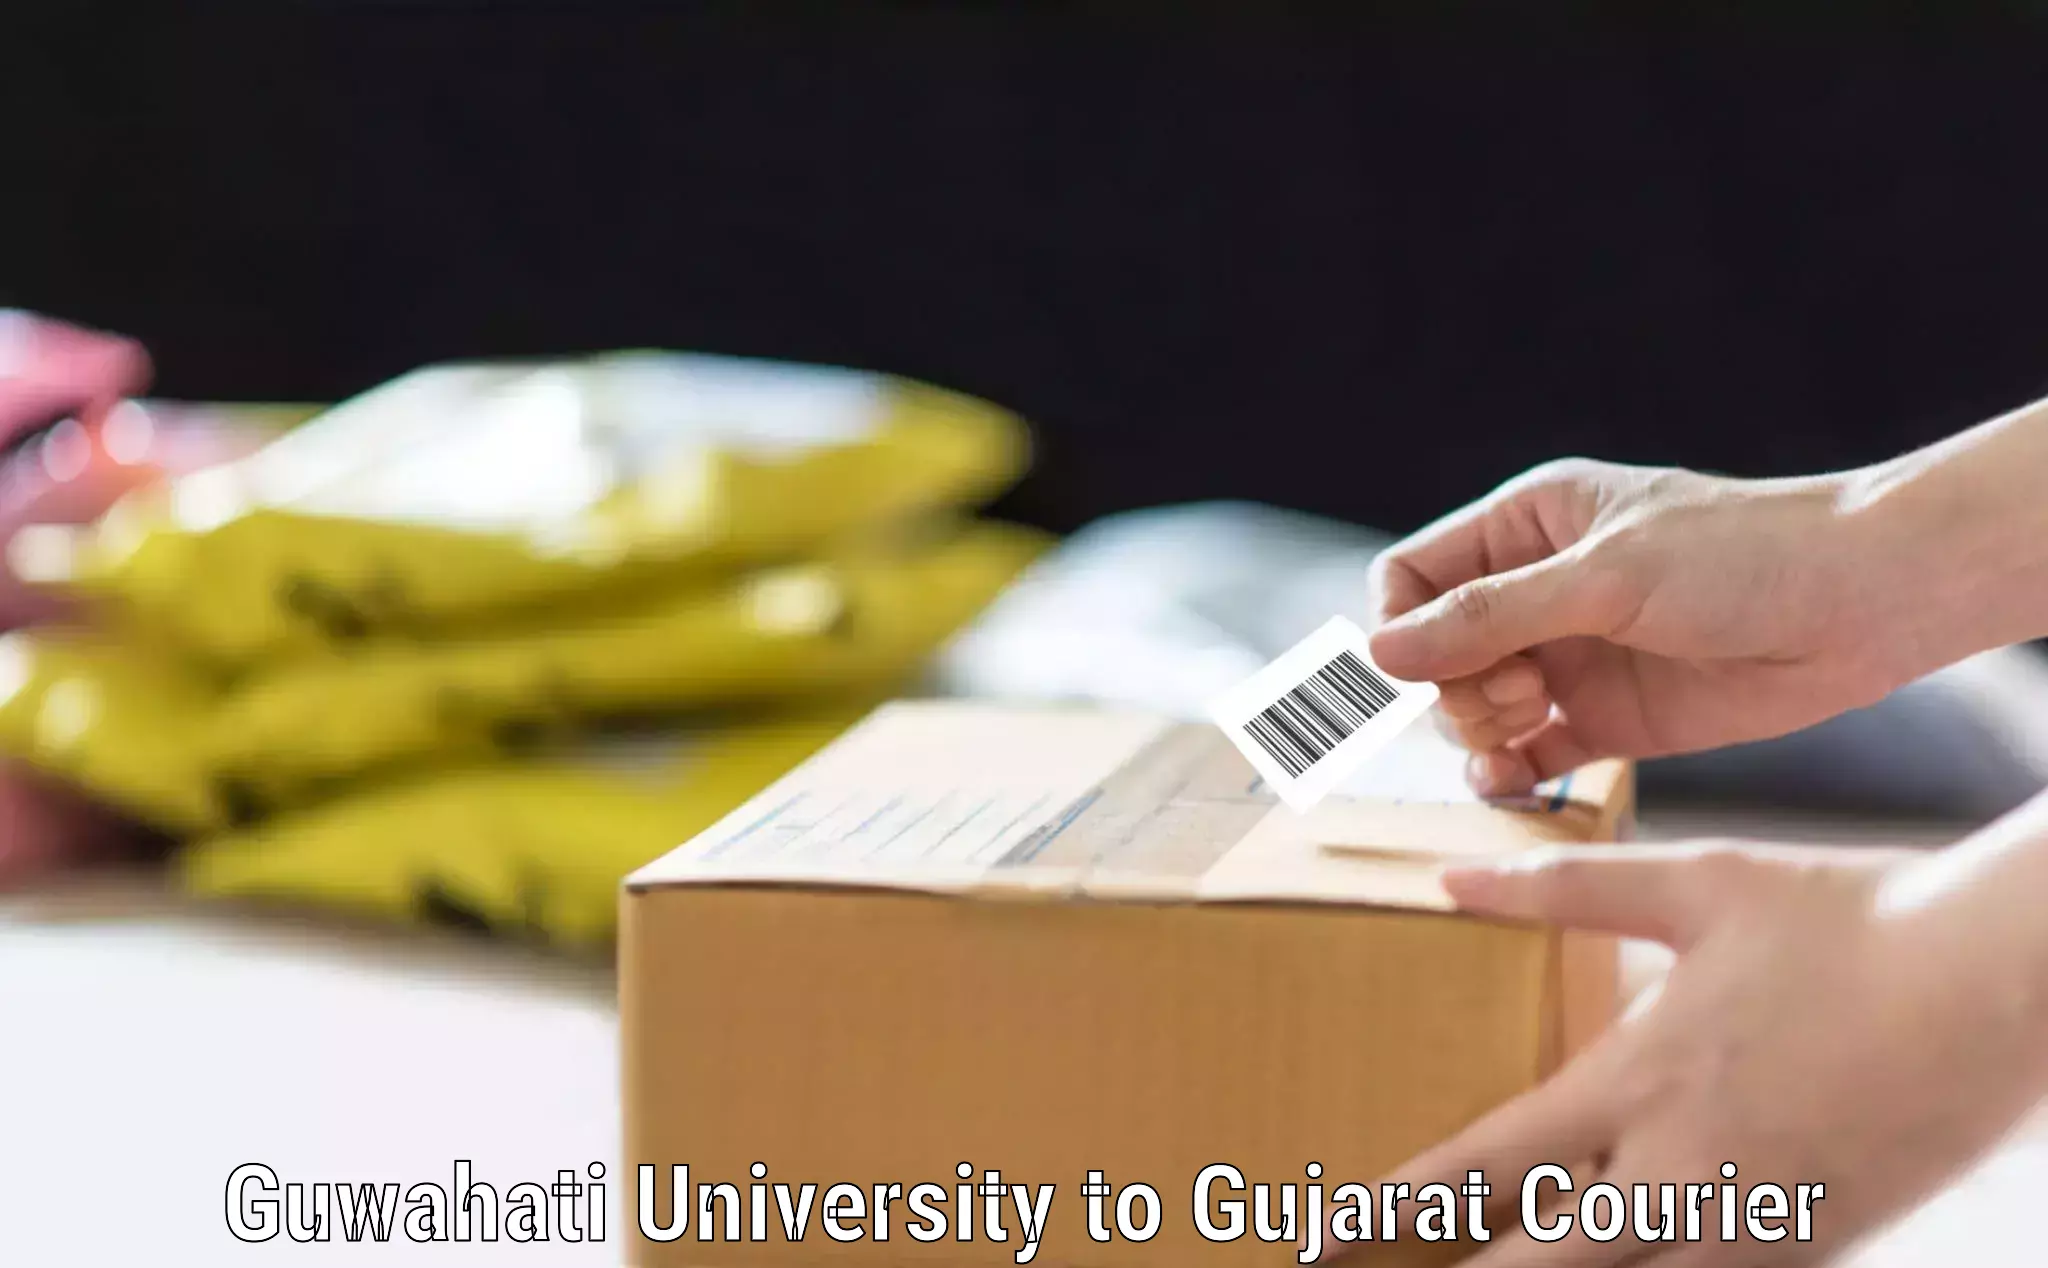 Instant baggage transport quote Guwahati University to Bharuch